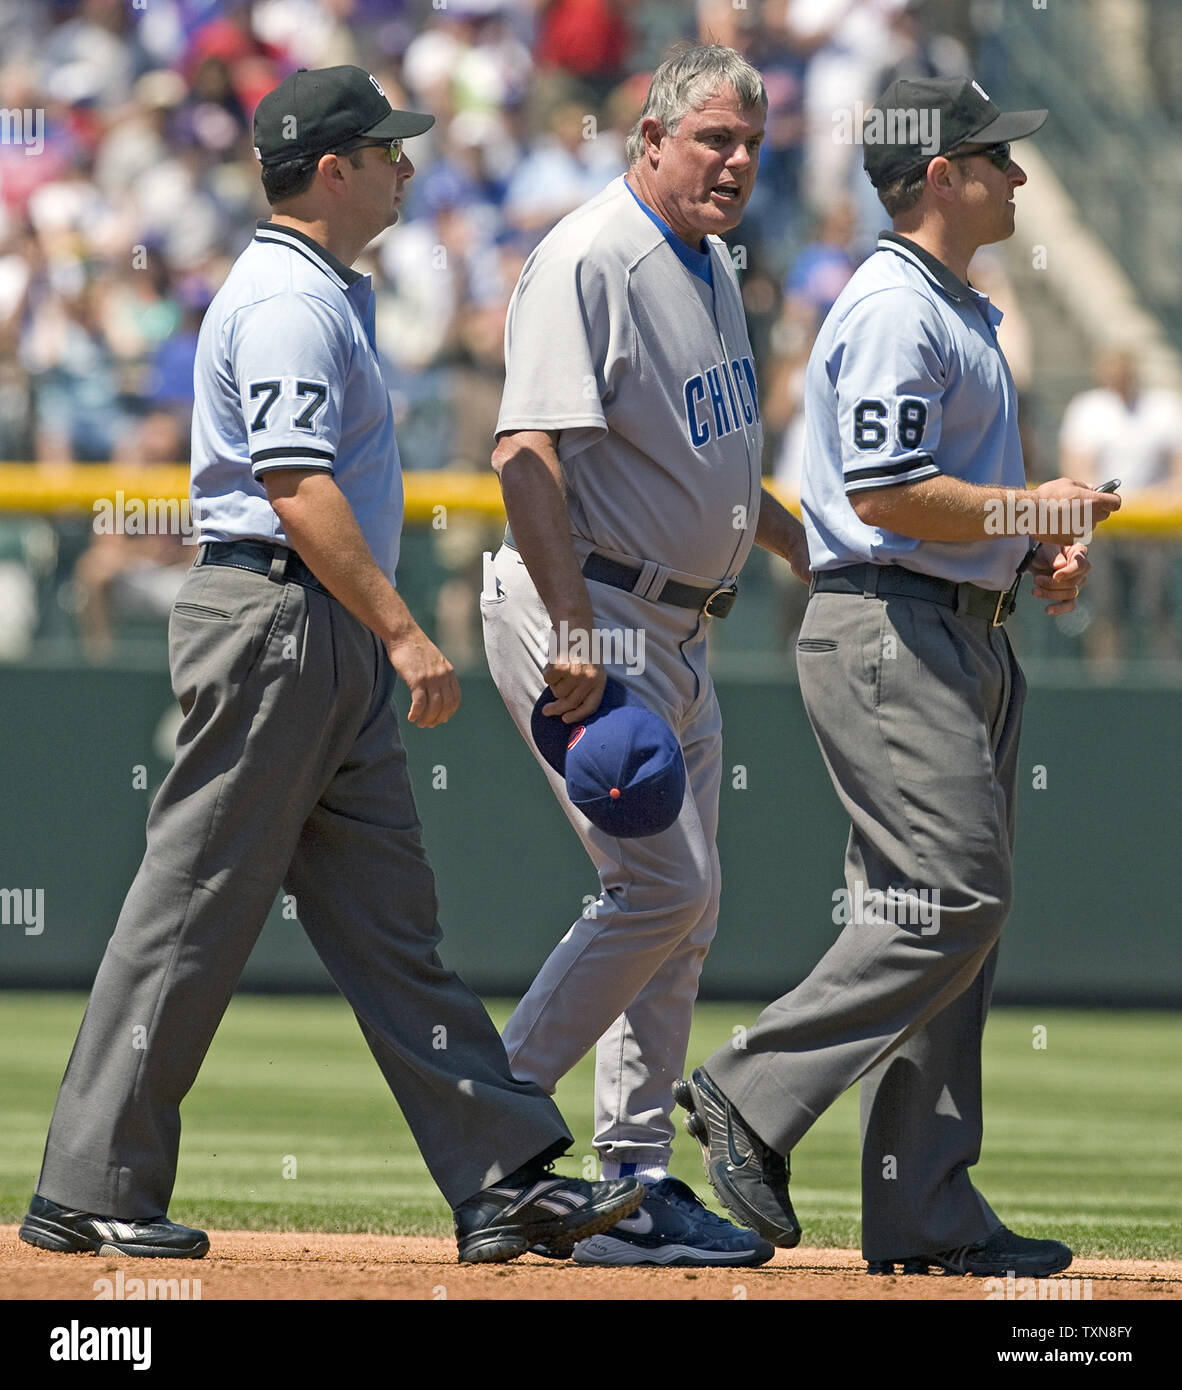 Chicago Cubs manager Lou Piniella (C) chases second base umpire Chris Guccione while trailed by first base umpire Jim Reynolds during the second inning against the Colorado Rockies at Coors Field in Denver on August 9, 2009.  Piniella was ejected for arguing the call on a double play that ended the inning for the Cubs.     UPI/Gary C. Caskey... Stock Photo